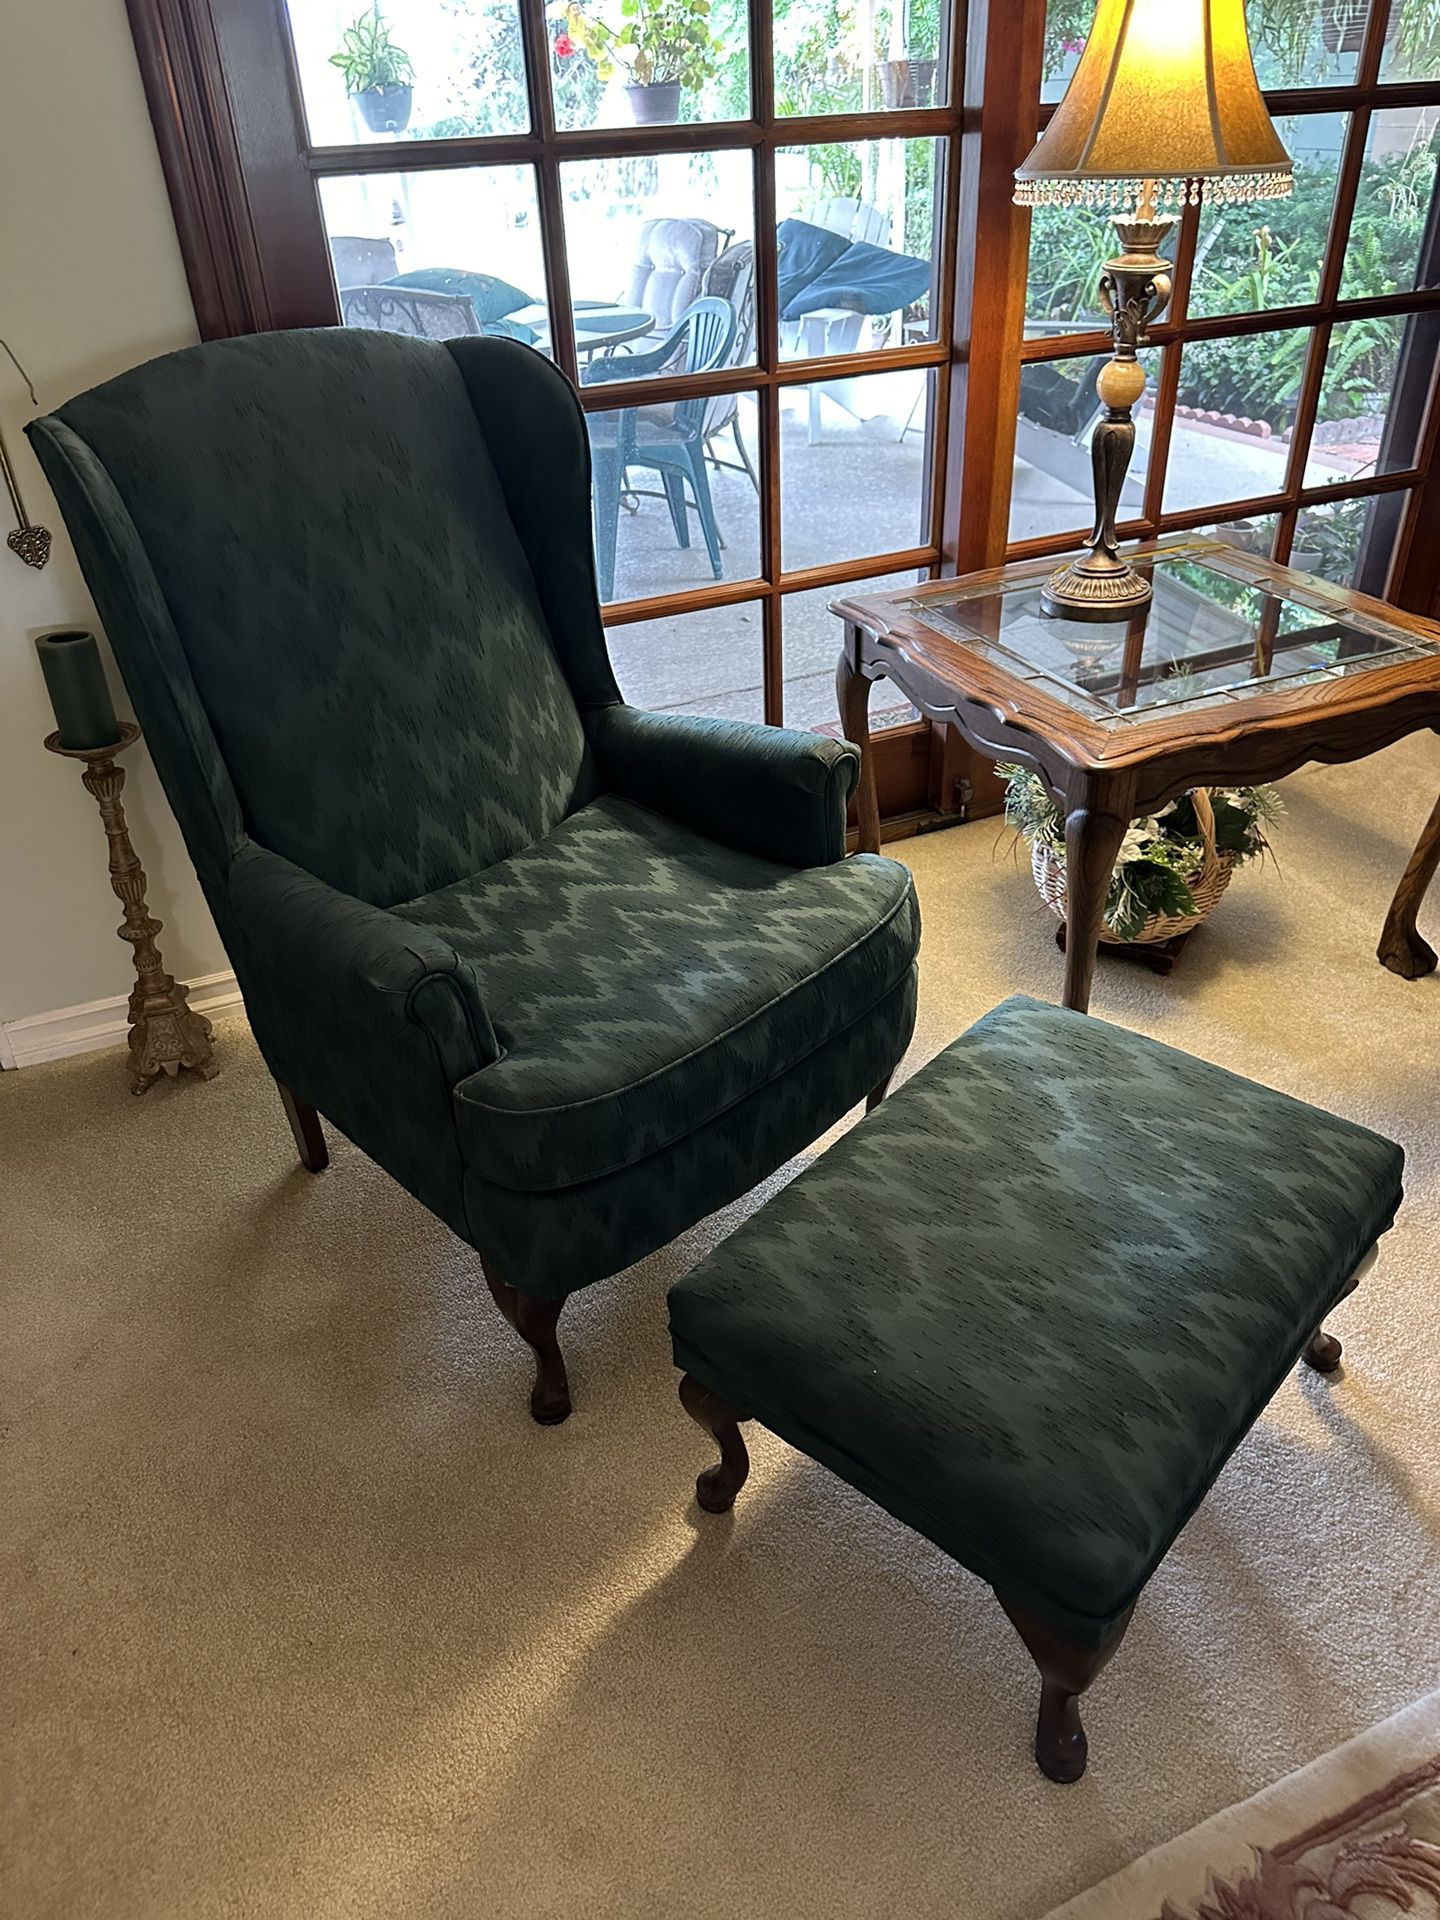 2 Green Wing Back Chairs 1 Ottoman